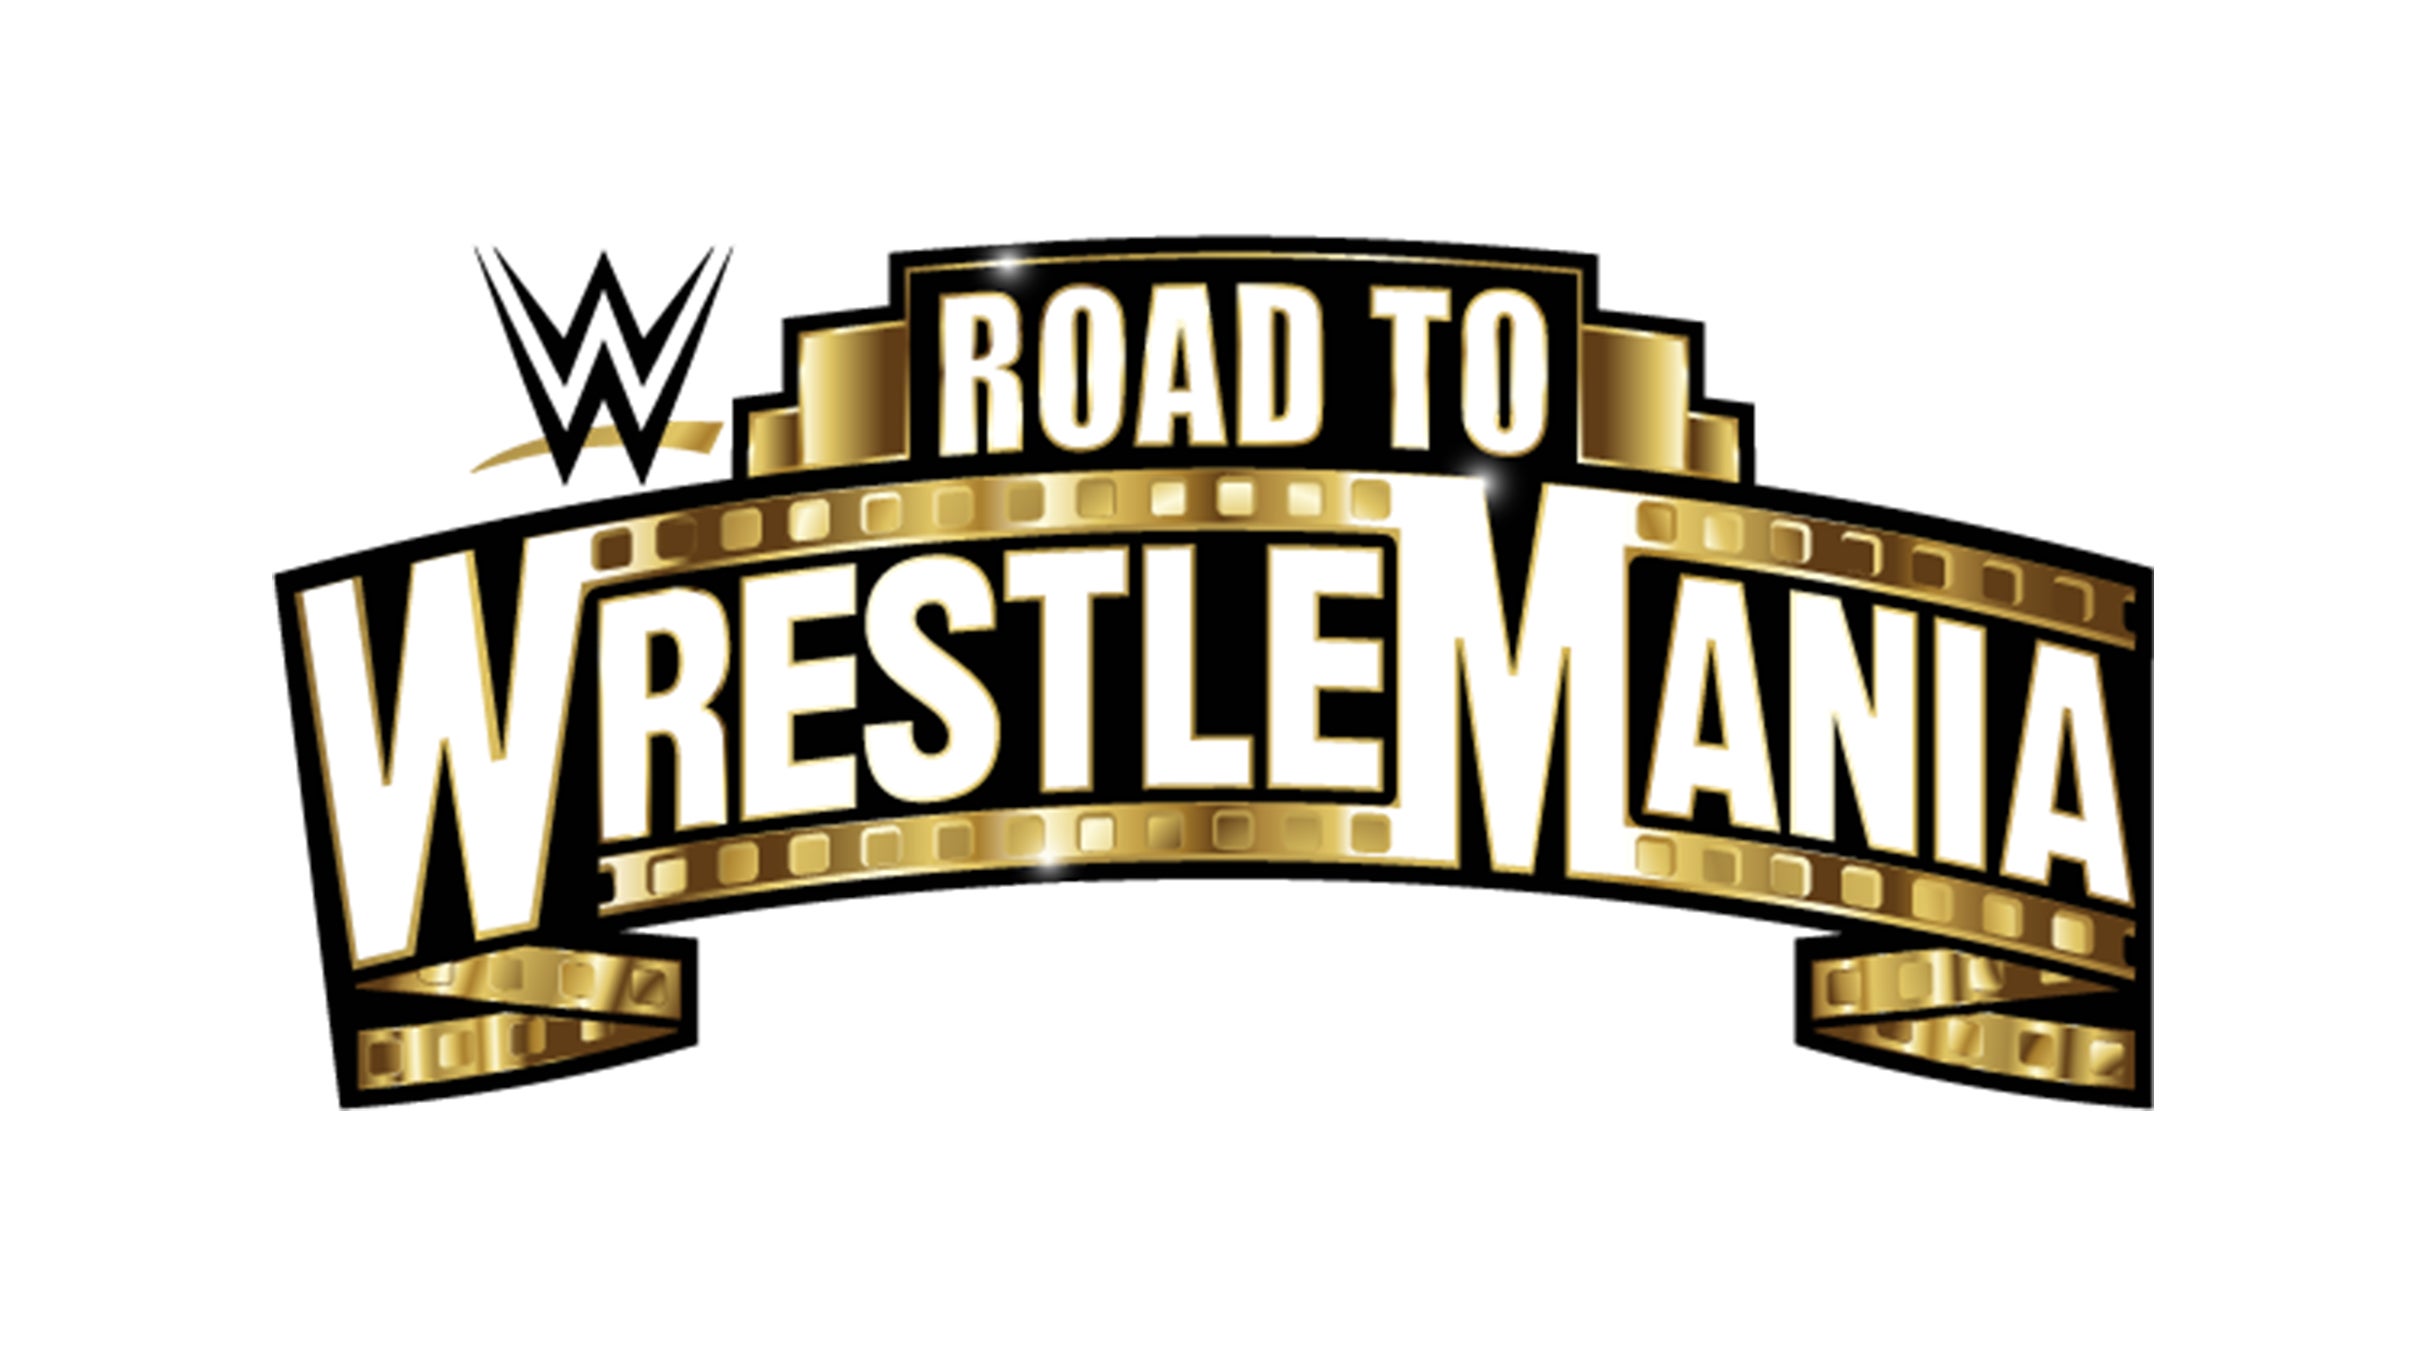 WWE Road To WrestleMania Results (03/05): Trenton, New Jersey